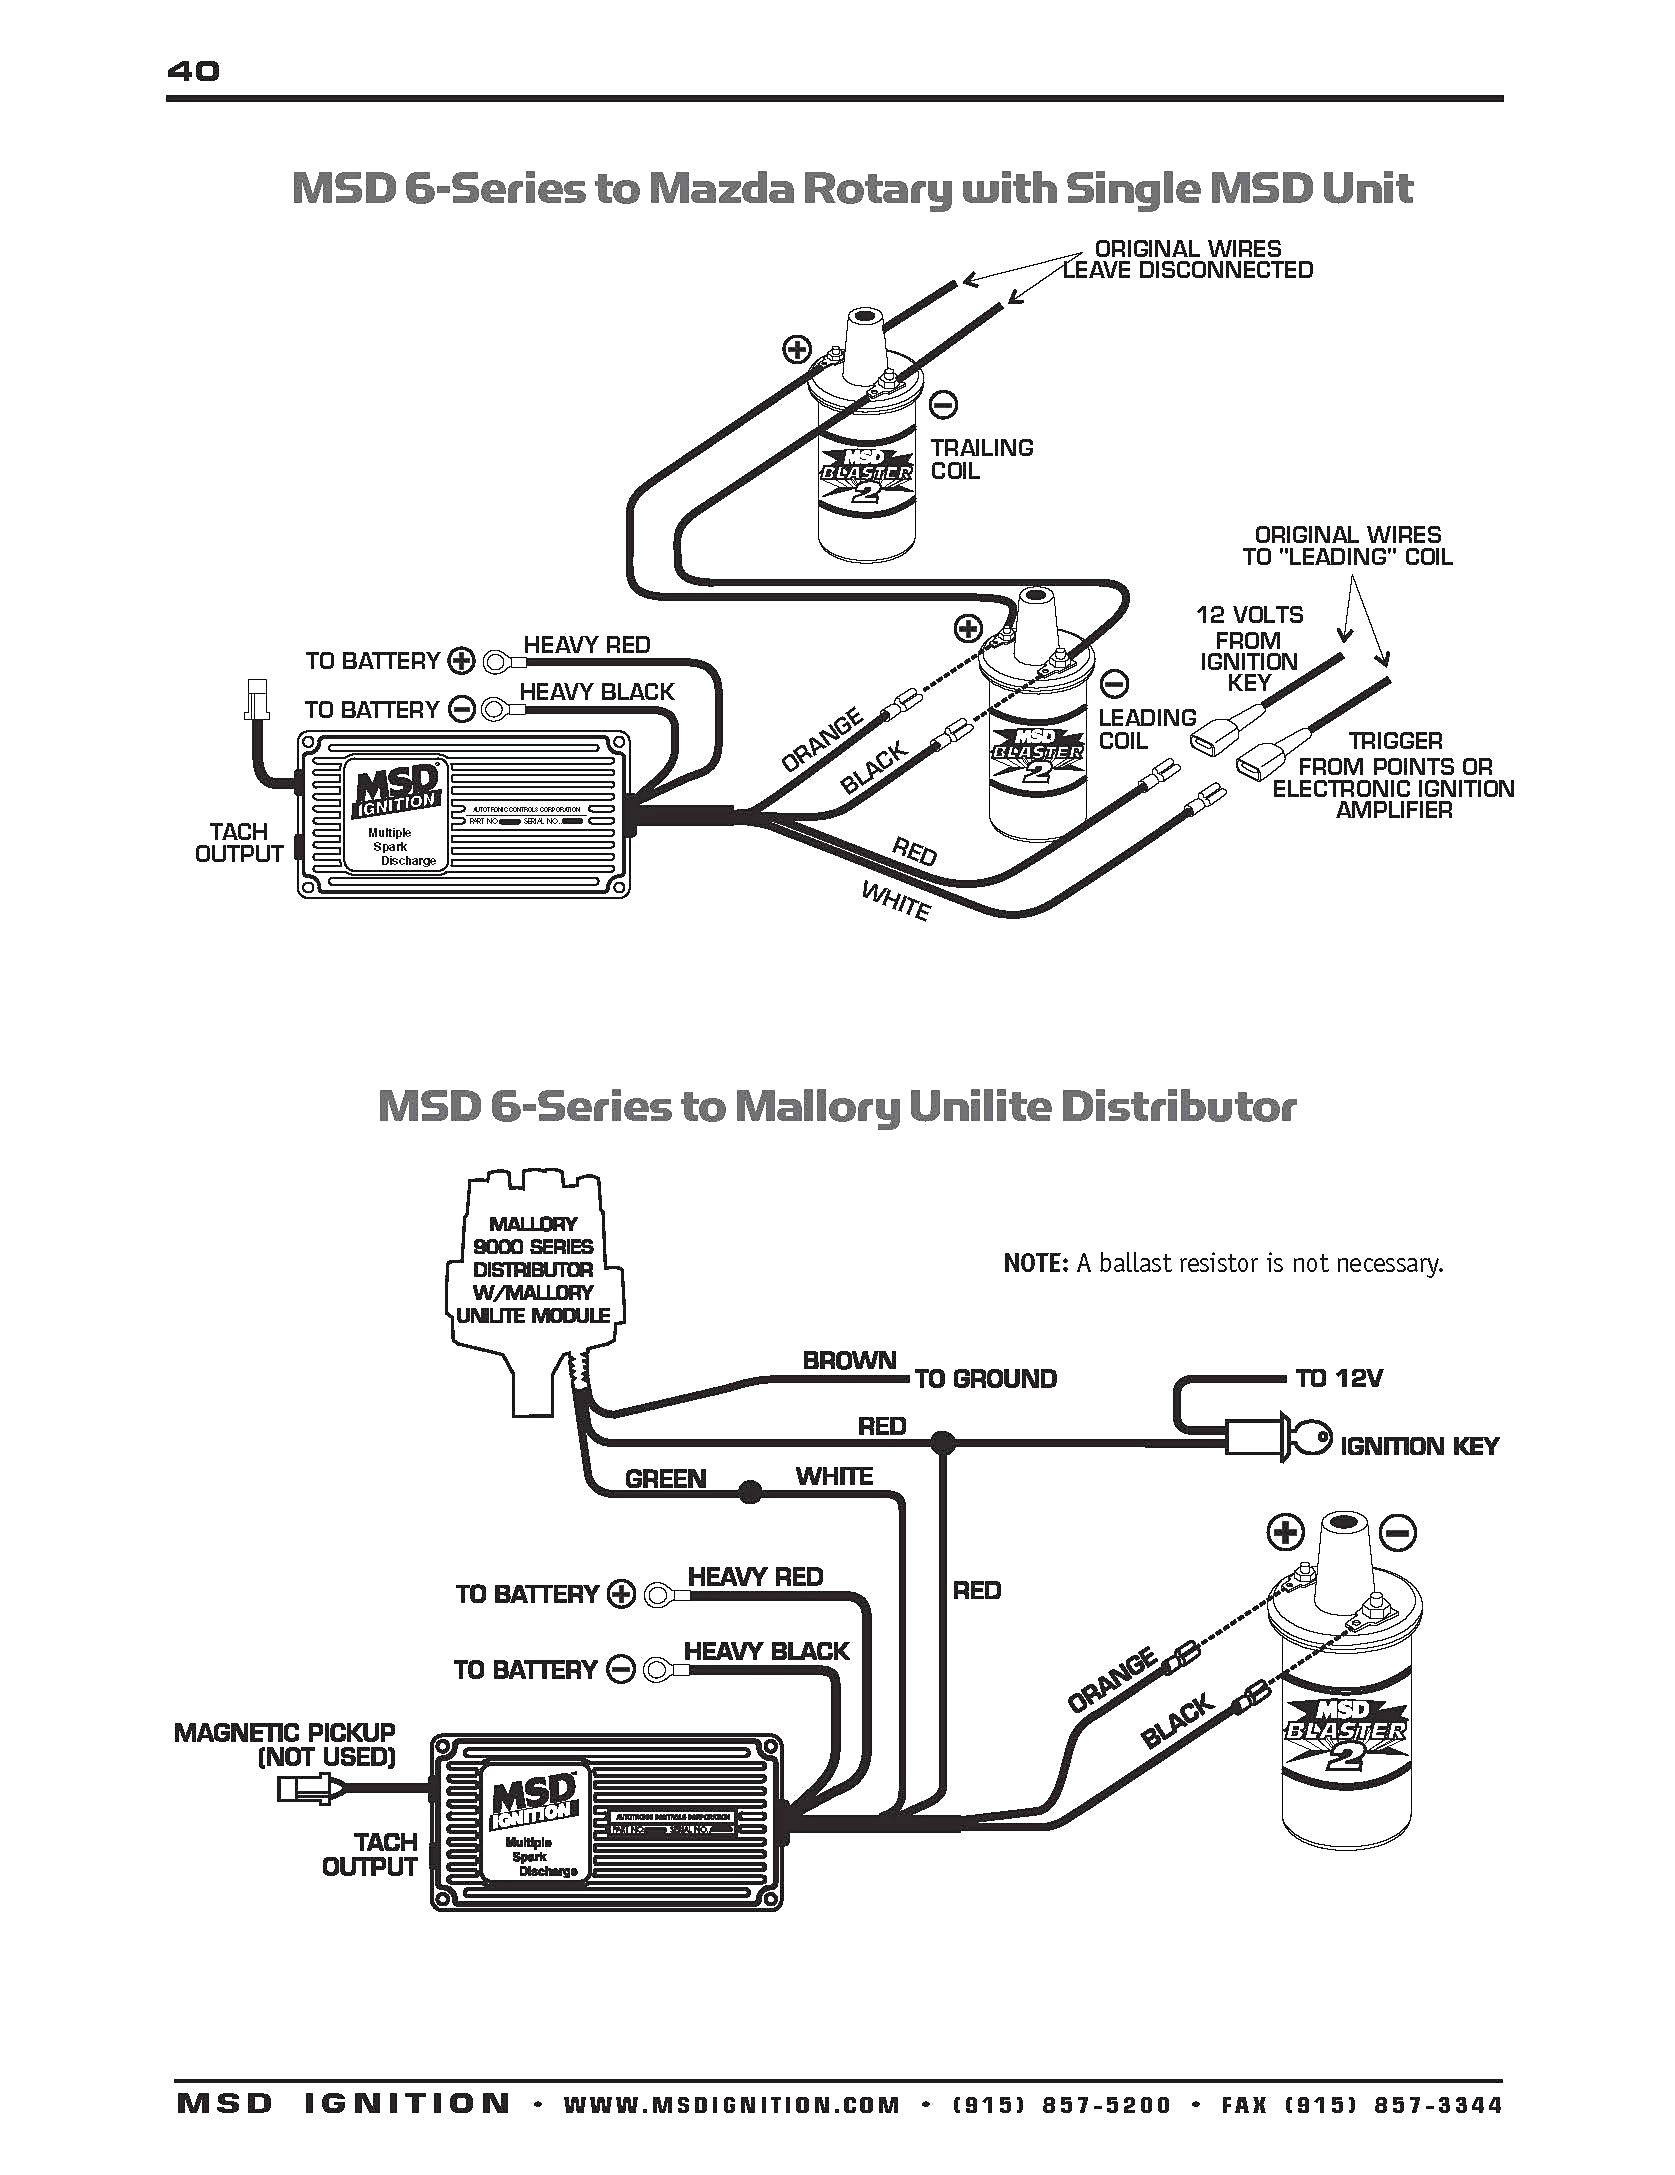 Mallory Wiring Diagram In Ignition